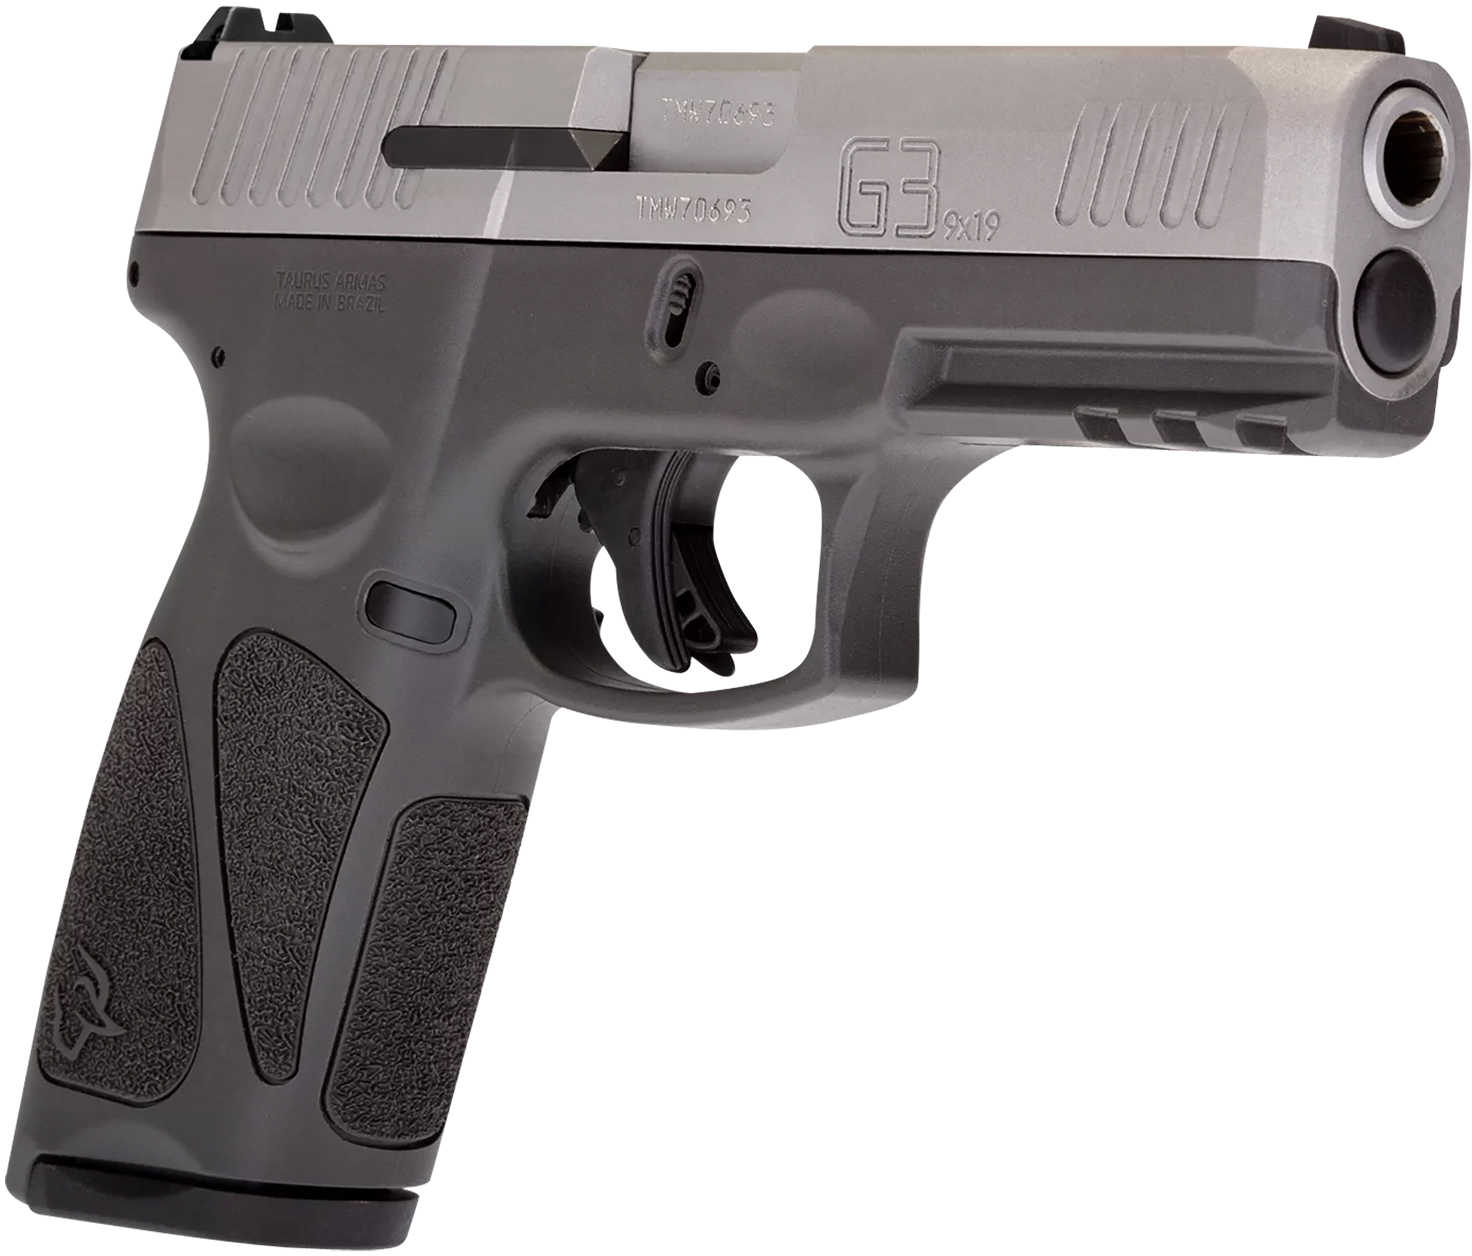 Taurus G3 Single Action Only Semi-Automatic Pistol 9mm Luger 4" Barrel (1)-15Rd & (1)-17Rd Magazines Fixed Front, Adjustable Rear Sights Serrated Matte Stainless Steel Slide Gray Polymer Finish